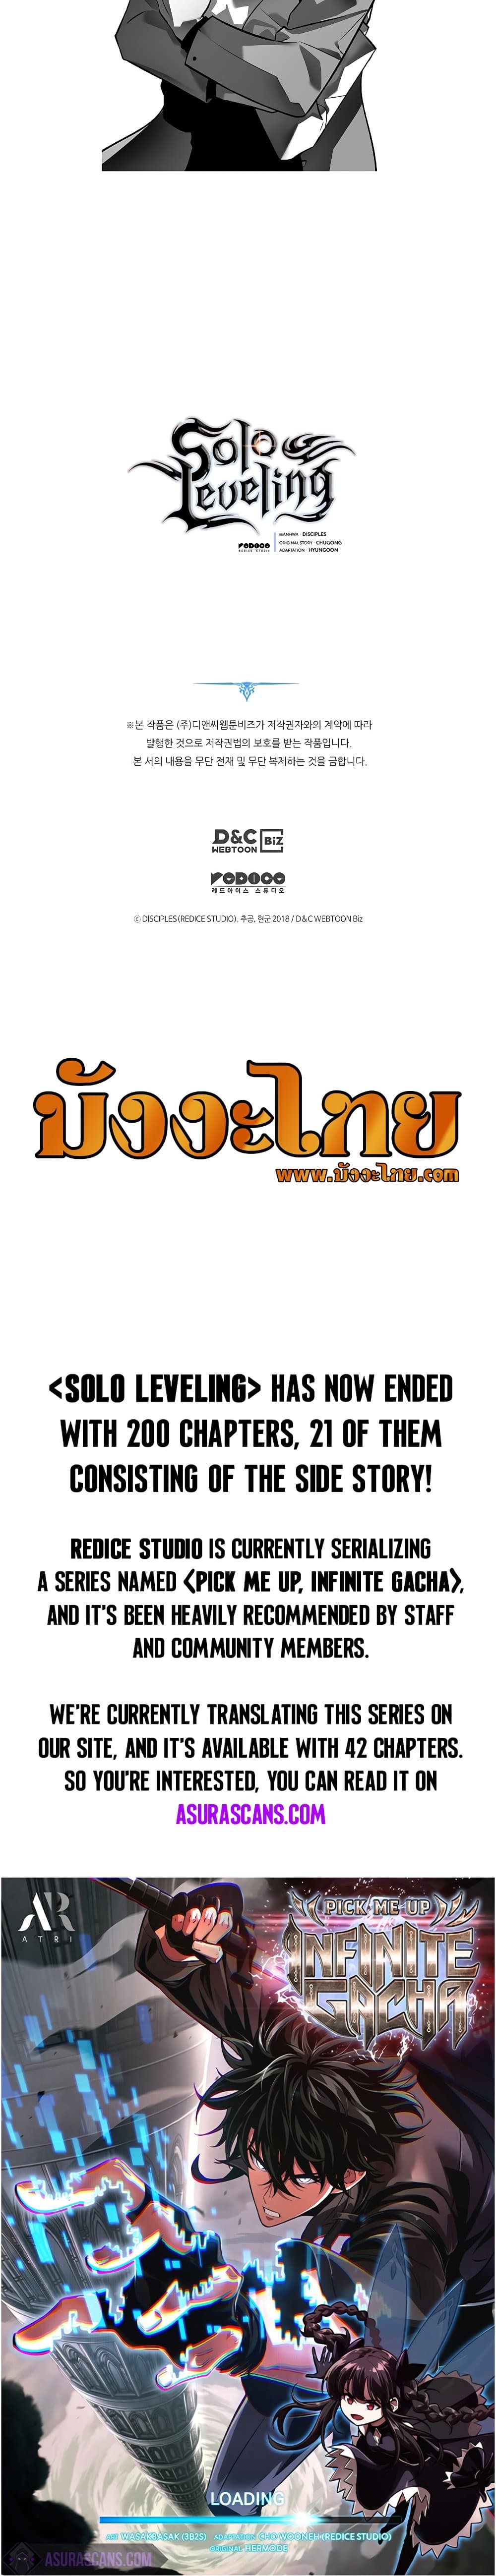 Solo Leveling 200 TH